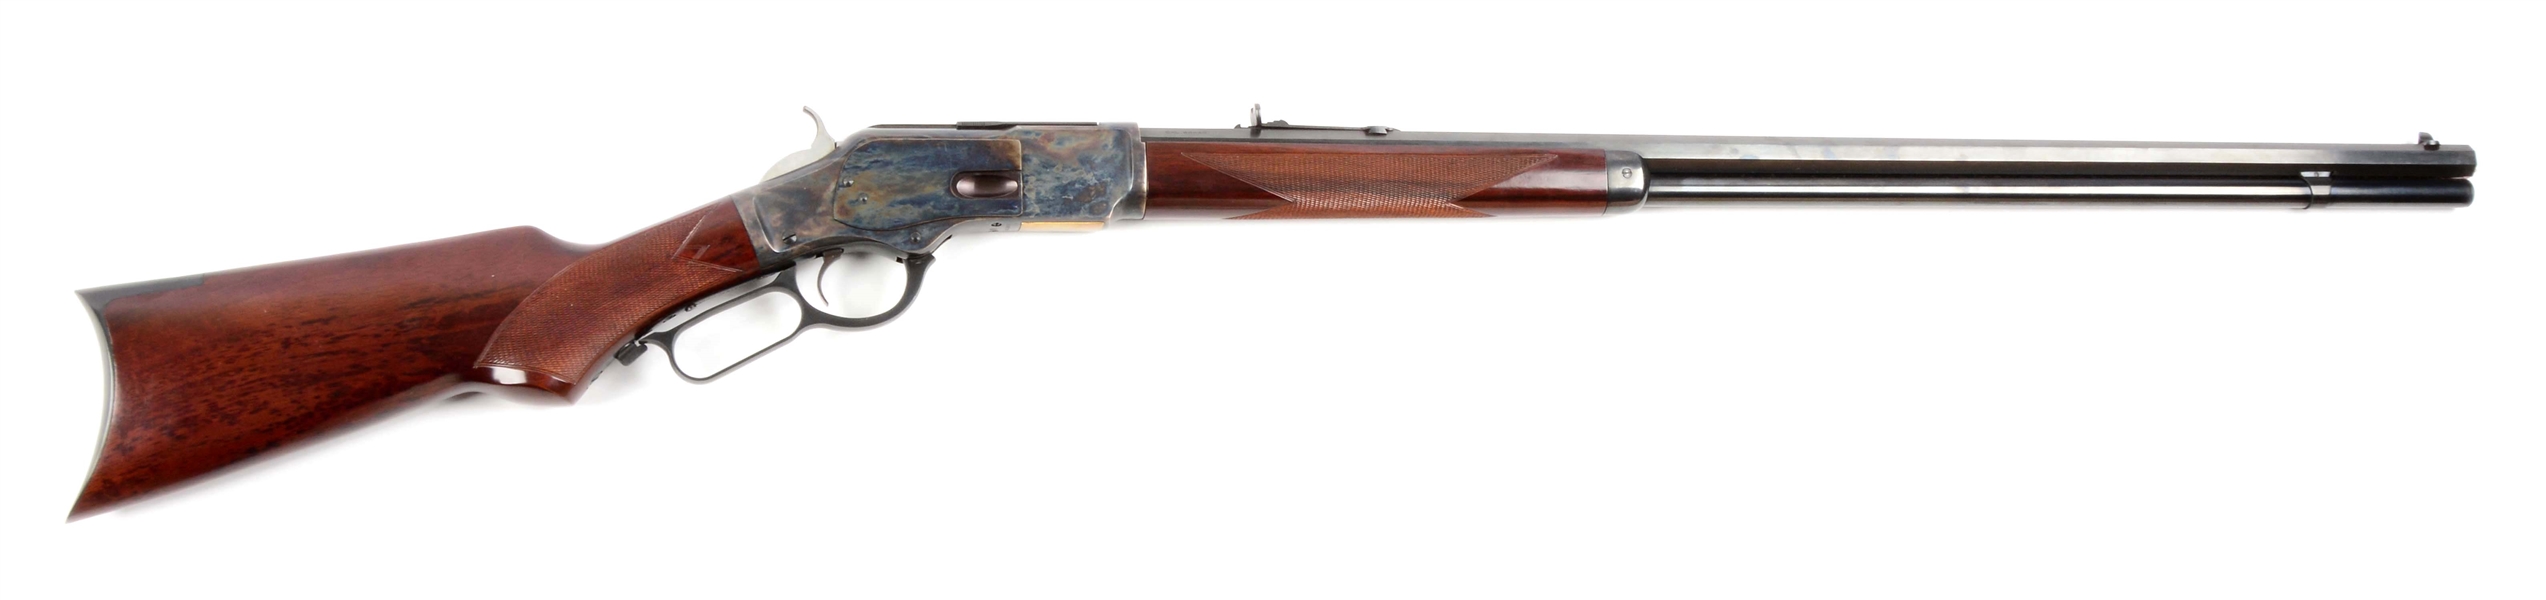 (M) UBERTI 1873 DELUXE LEVER ACTION SPORTING RIFLE.